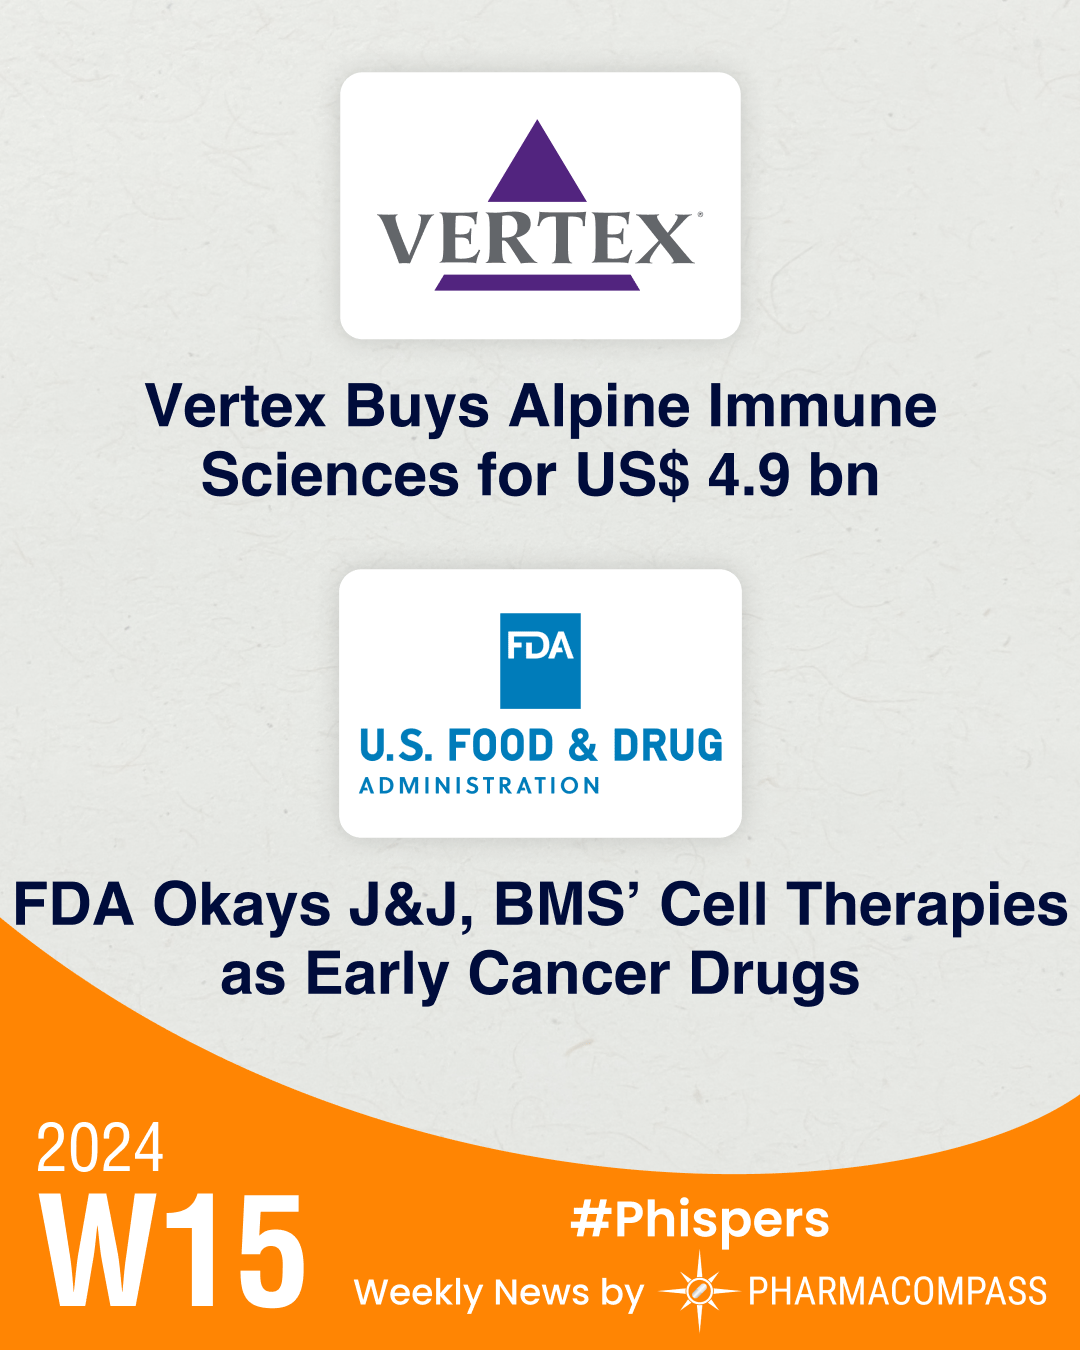 Vertex buys Alpine Immune Sciences for US$ 4.9 billion; Merck KGaA signs ADC deal with AI biotech Caris